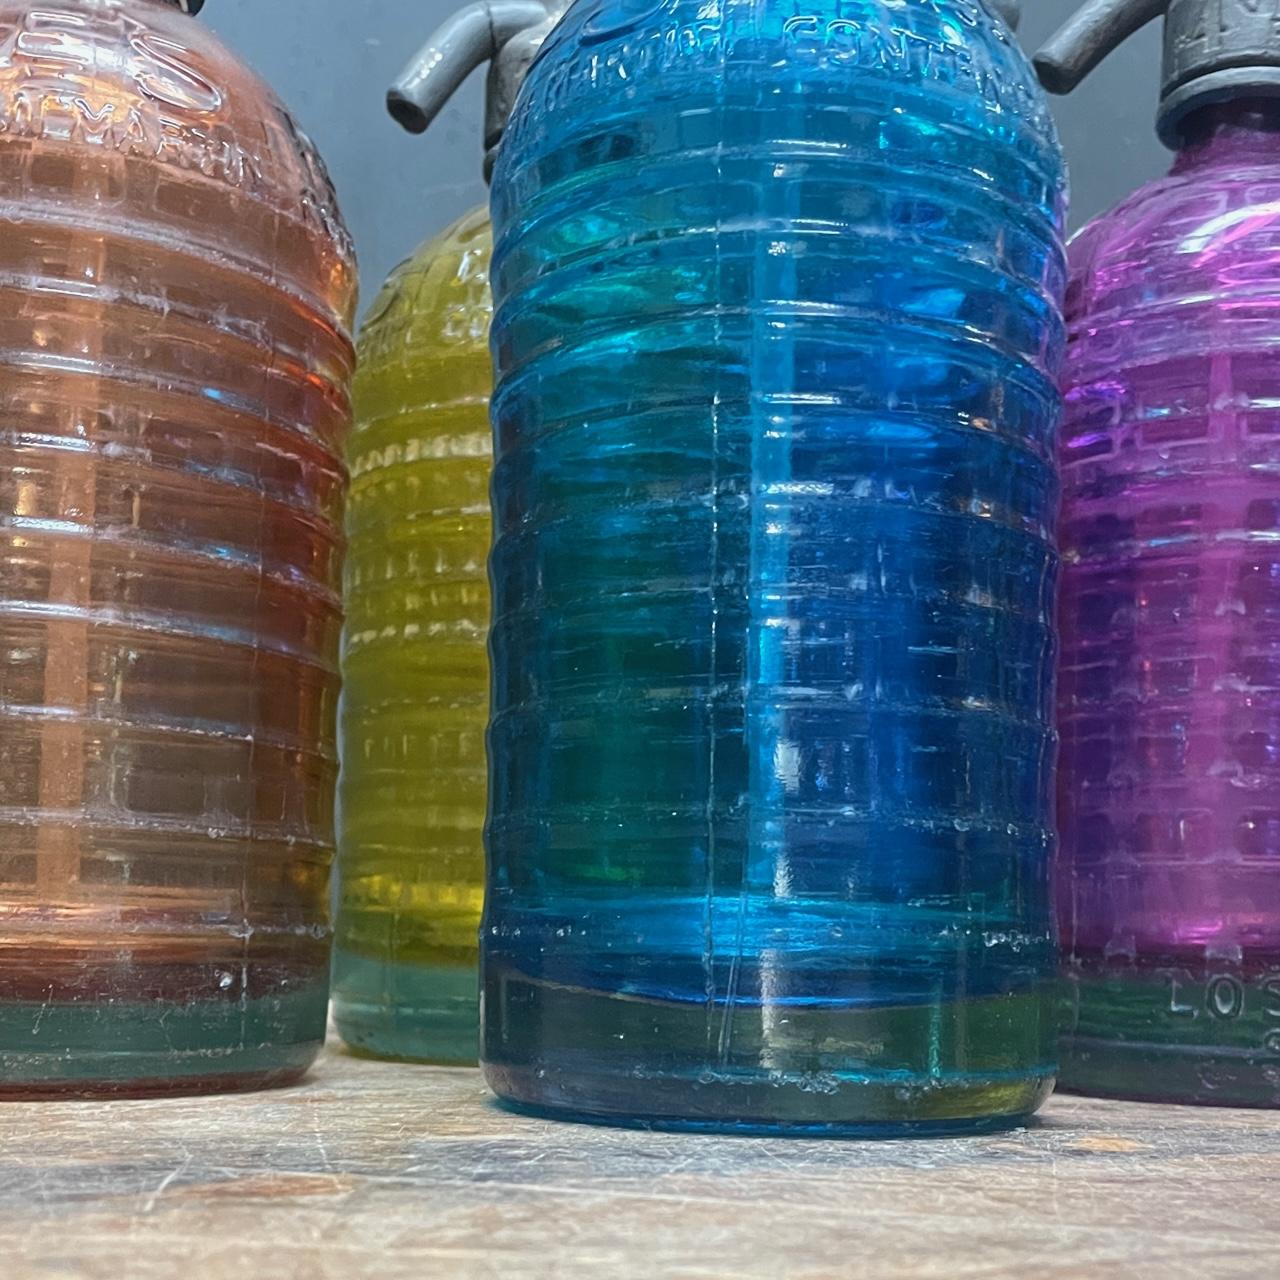 1940s Lourdes Siphon Seltzer Soda Bottle Collection Colorful Glass Vintage Decor In Distressed Condition For Sale In Hyattsville, MD